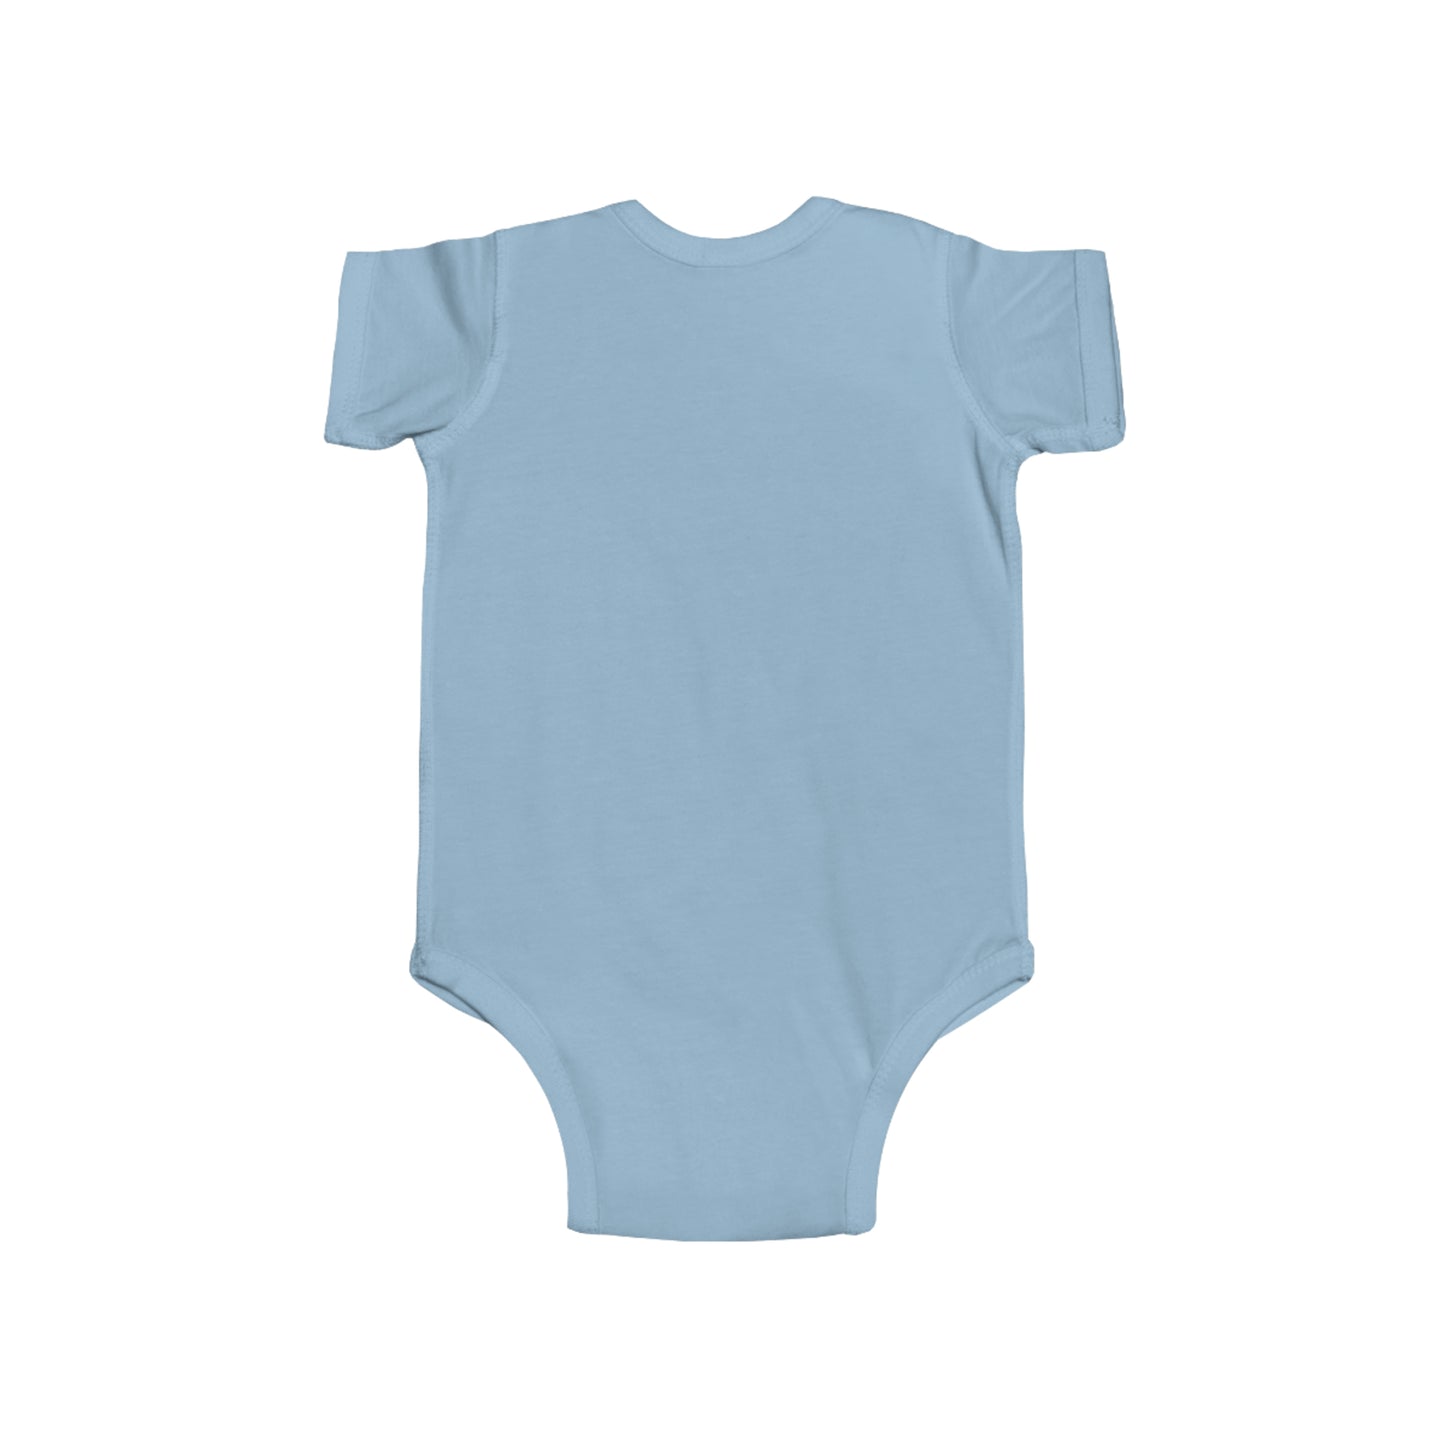 Peace Love Baby Collection- Baby Swiftie Infant Fine Jersey Bodysuit